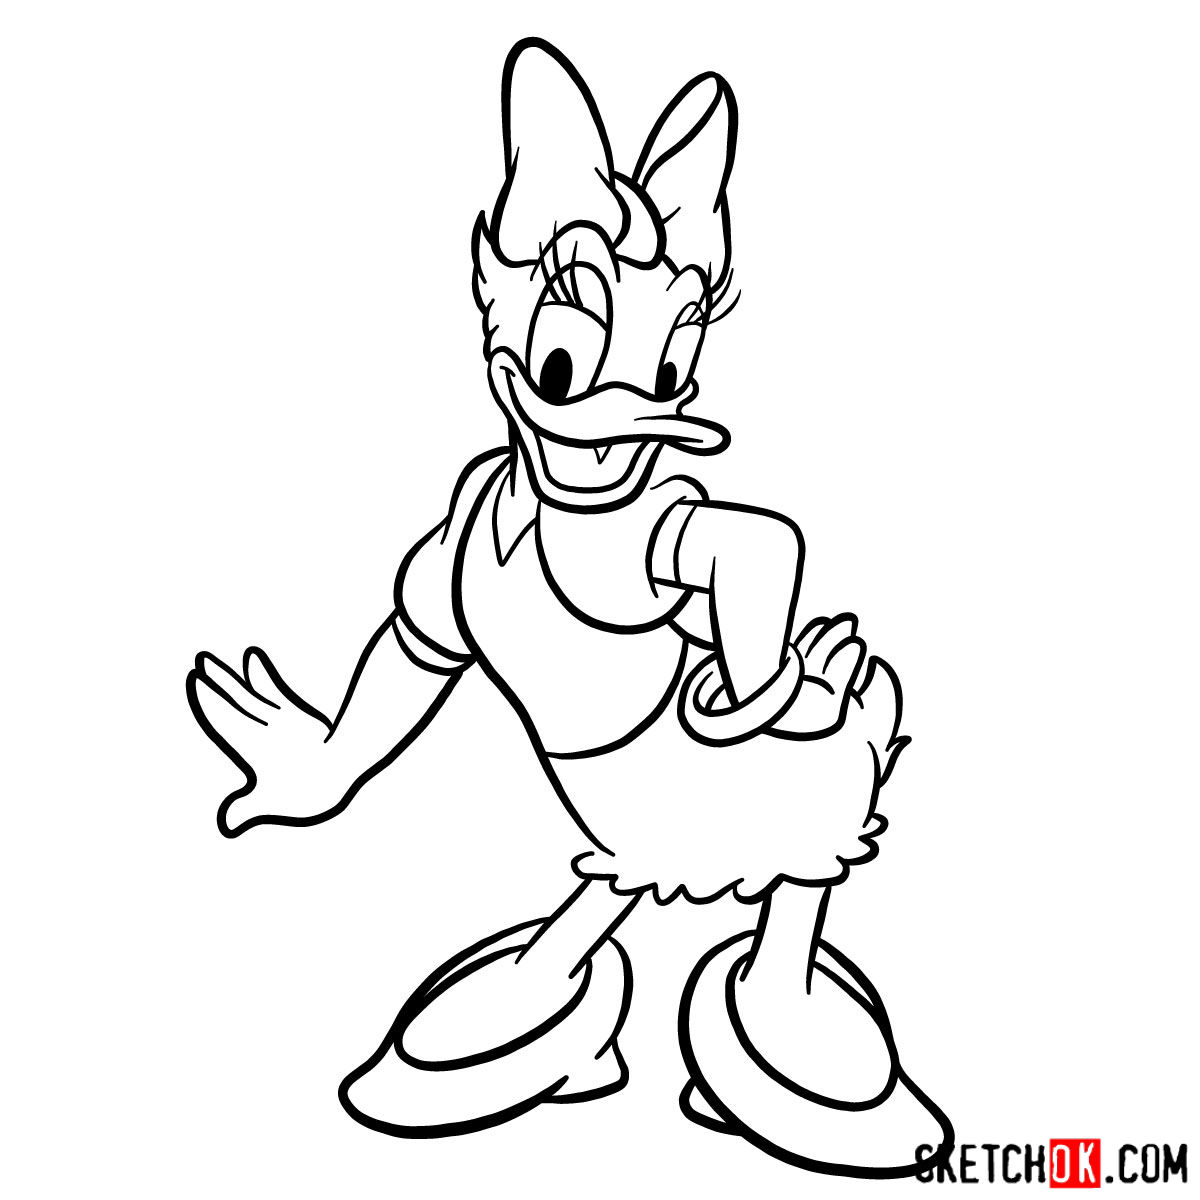 How to draw Daisy Duck - step 13